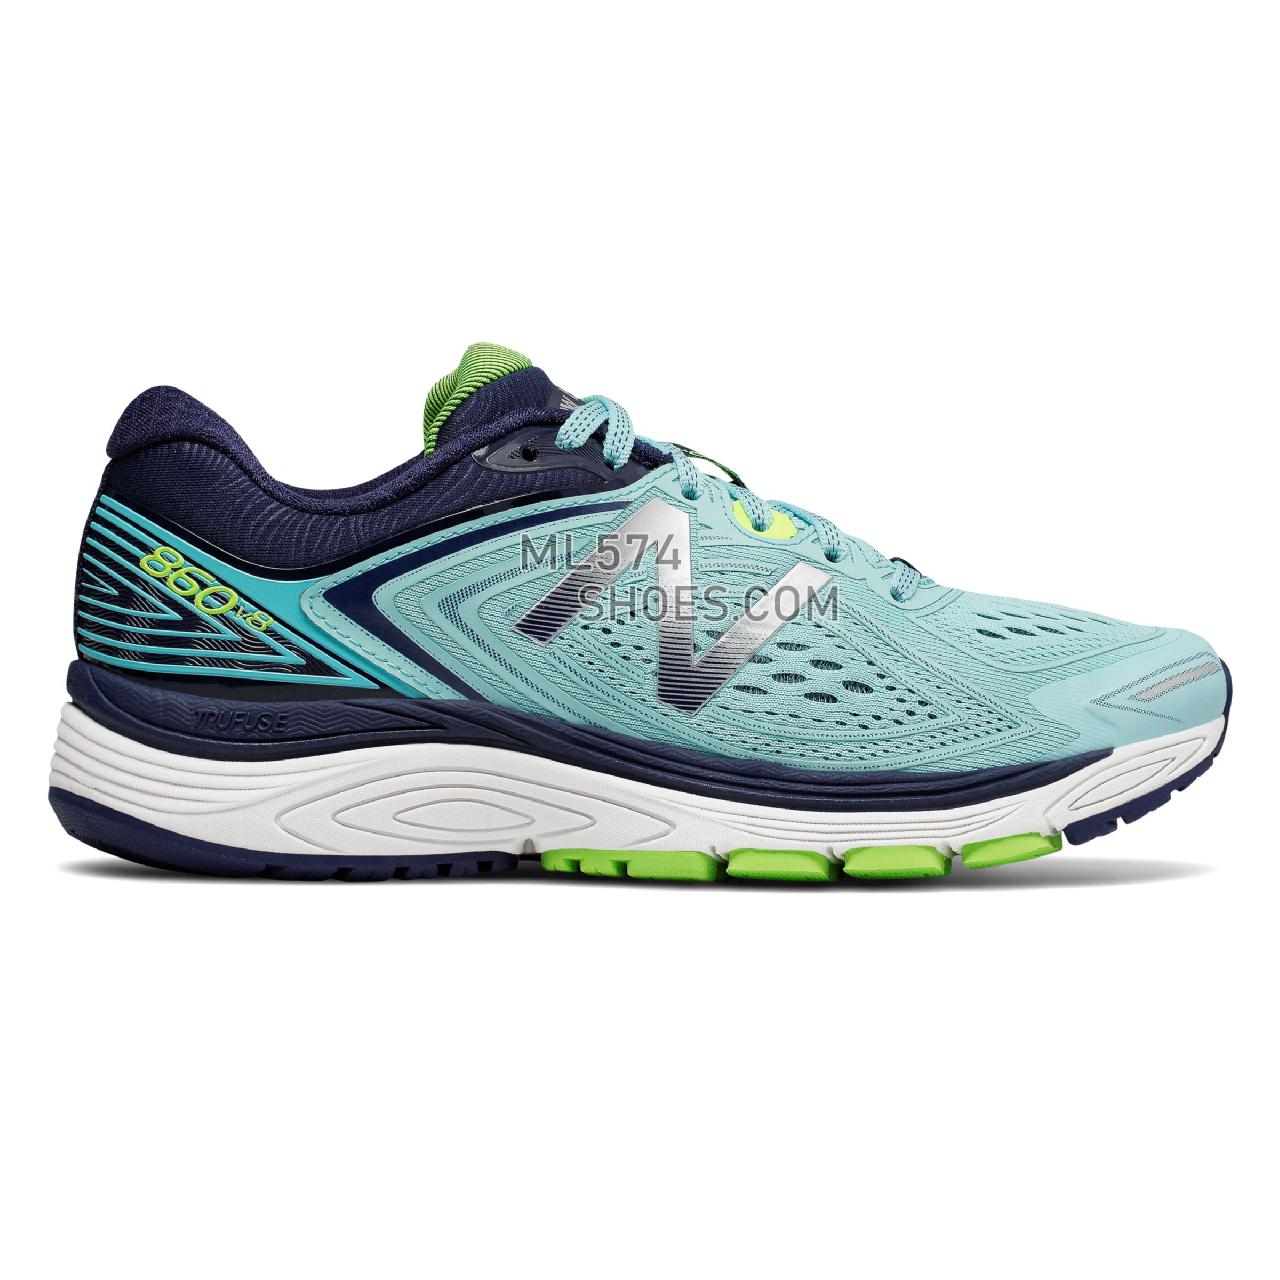 New Balance 860v8 - Women's 860 - Running Sea Spray with Pigment and Energy Lime - W860BN8